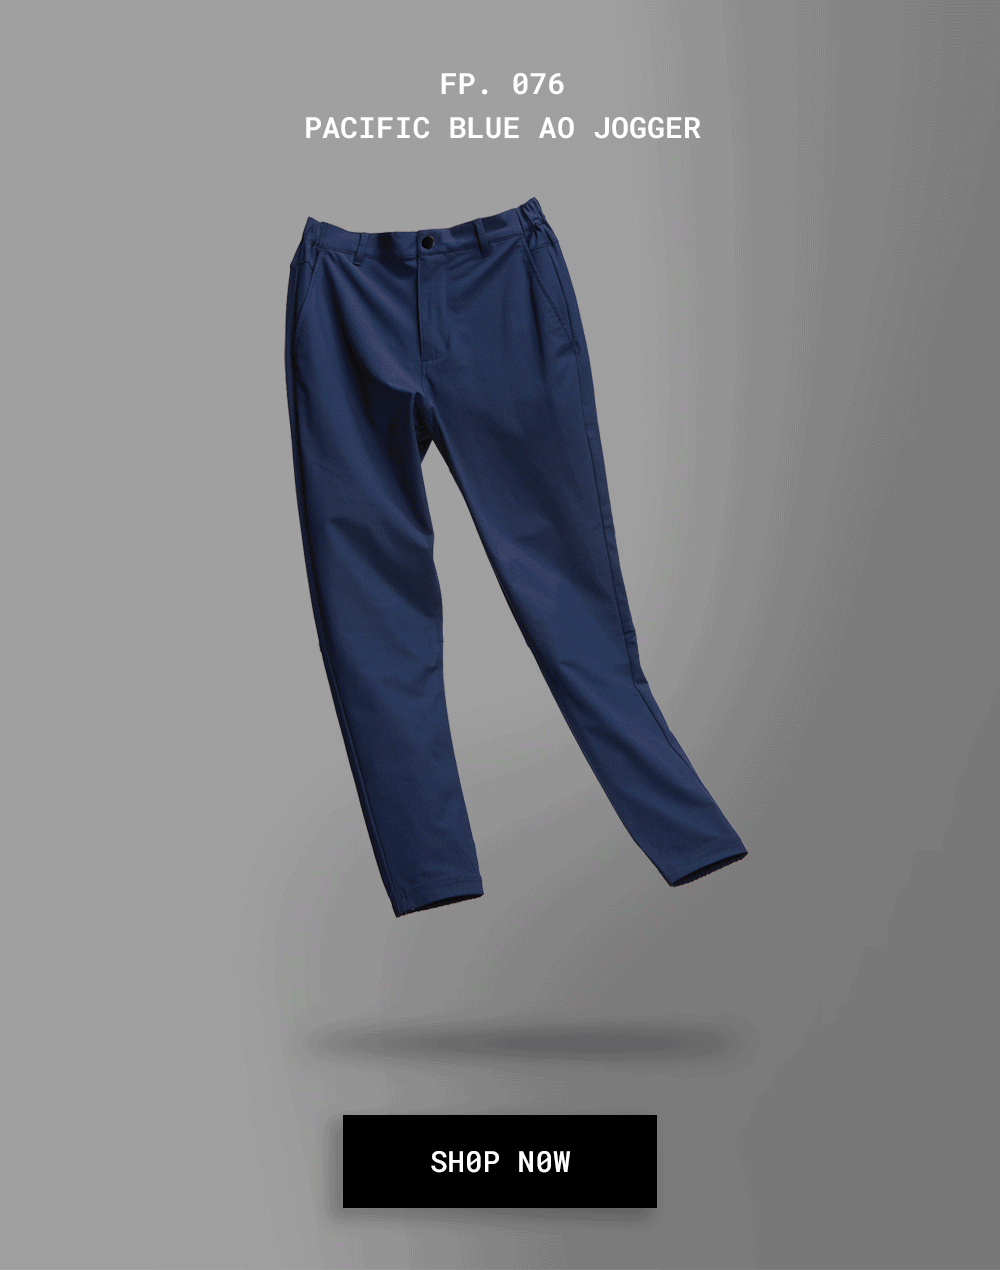 Cuts: LIMITED STOCK: The Pacific Blue AO Jogger